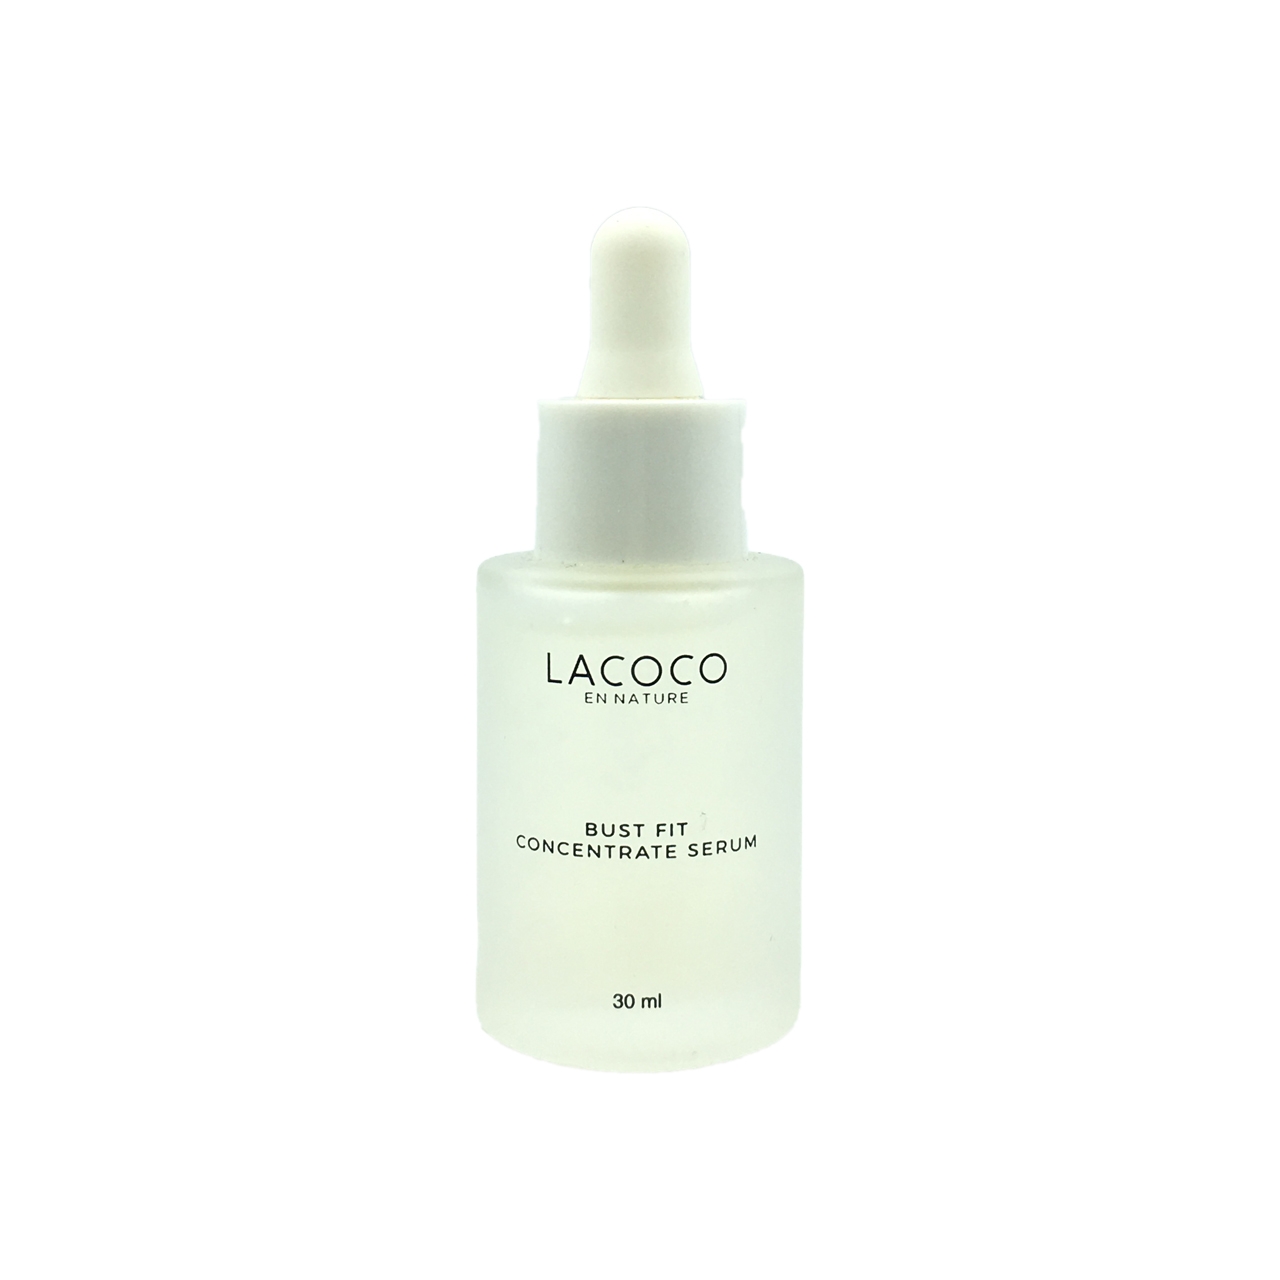 Lacoco En Nature Bust Fit Concentrate Serum Skin Care